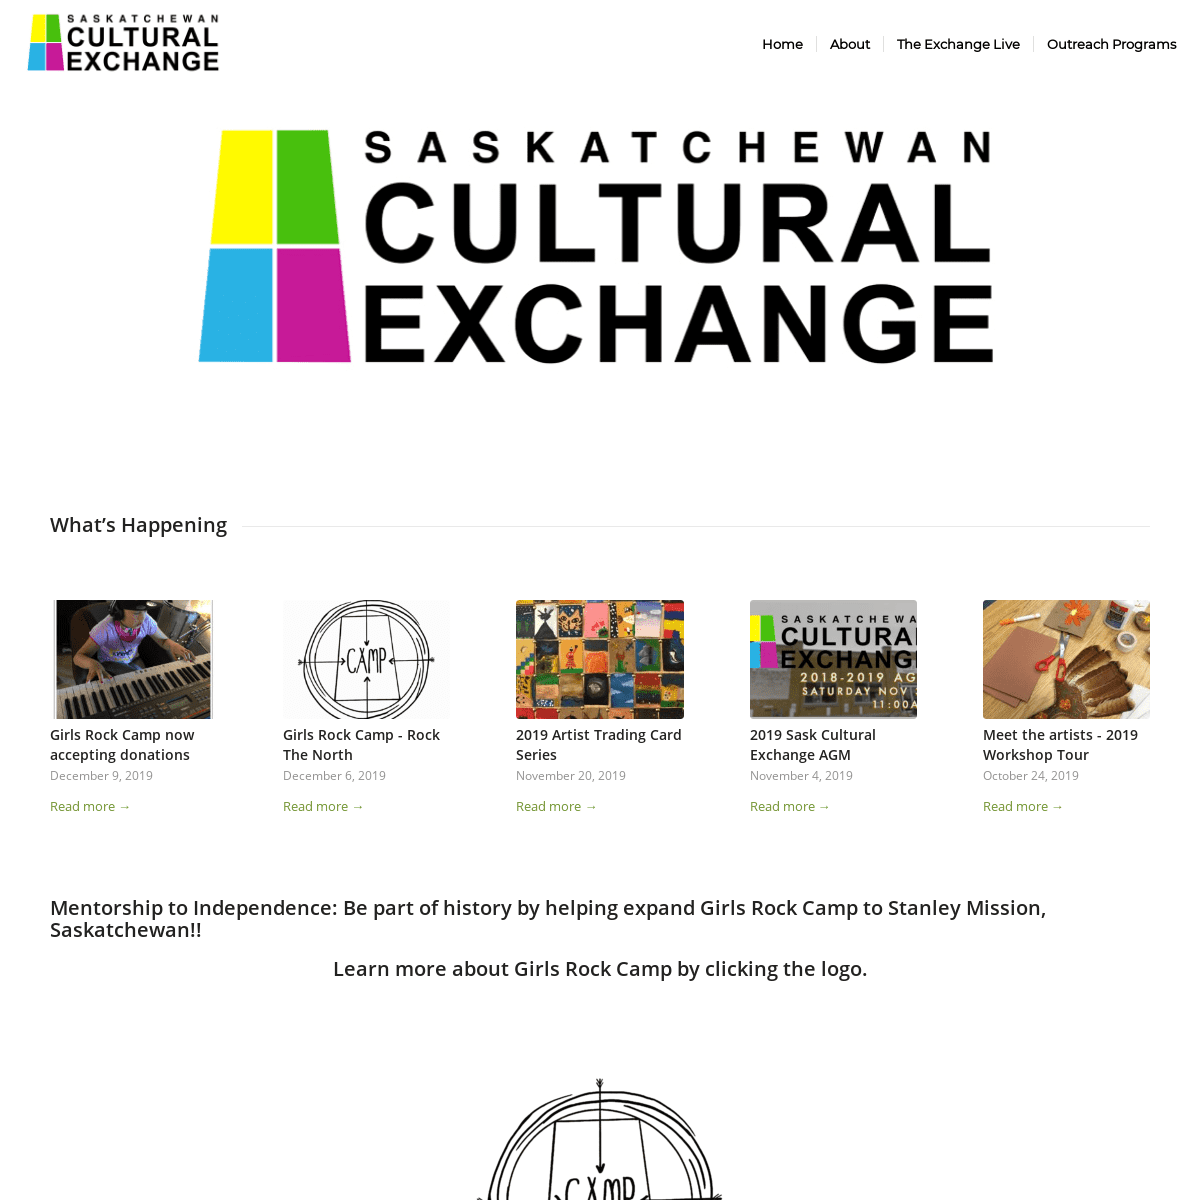 A complete backup of culturalexchange.ca